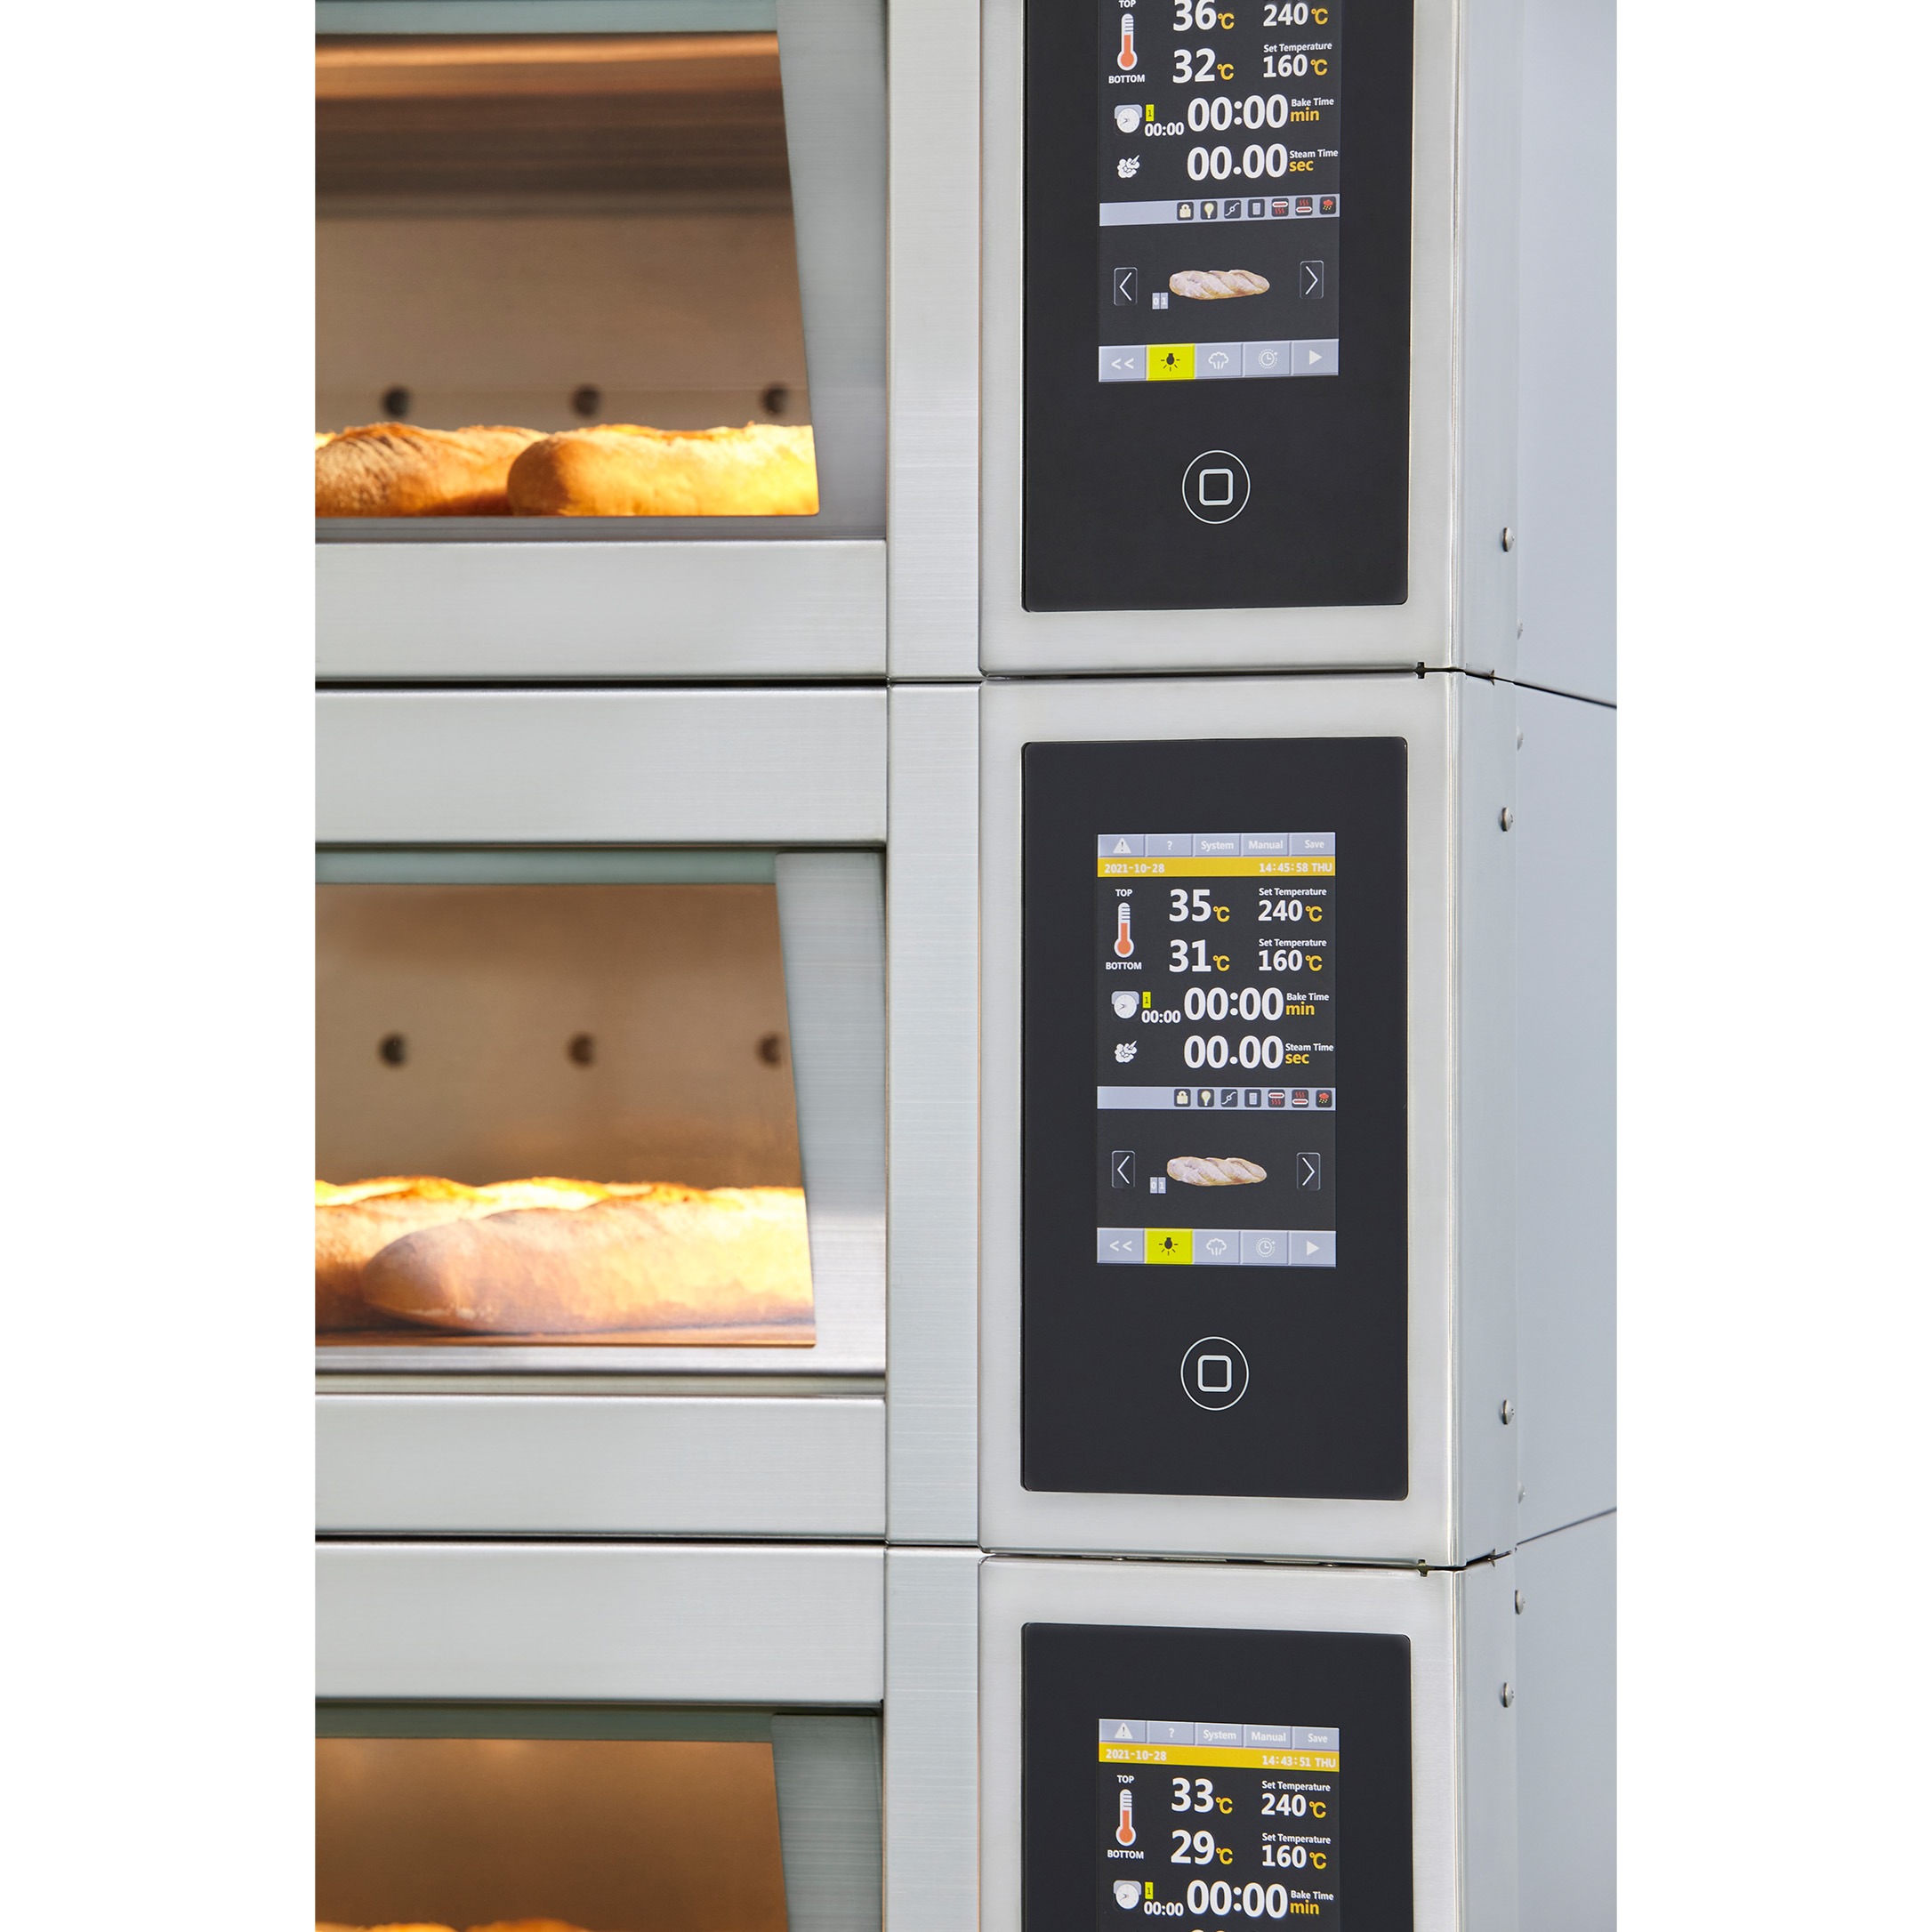 InnoBC Oven 4 trays 3 tiers detail carousel mini size images